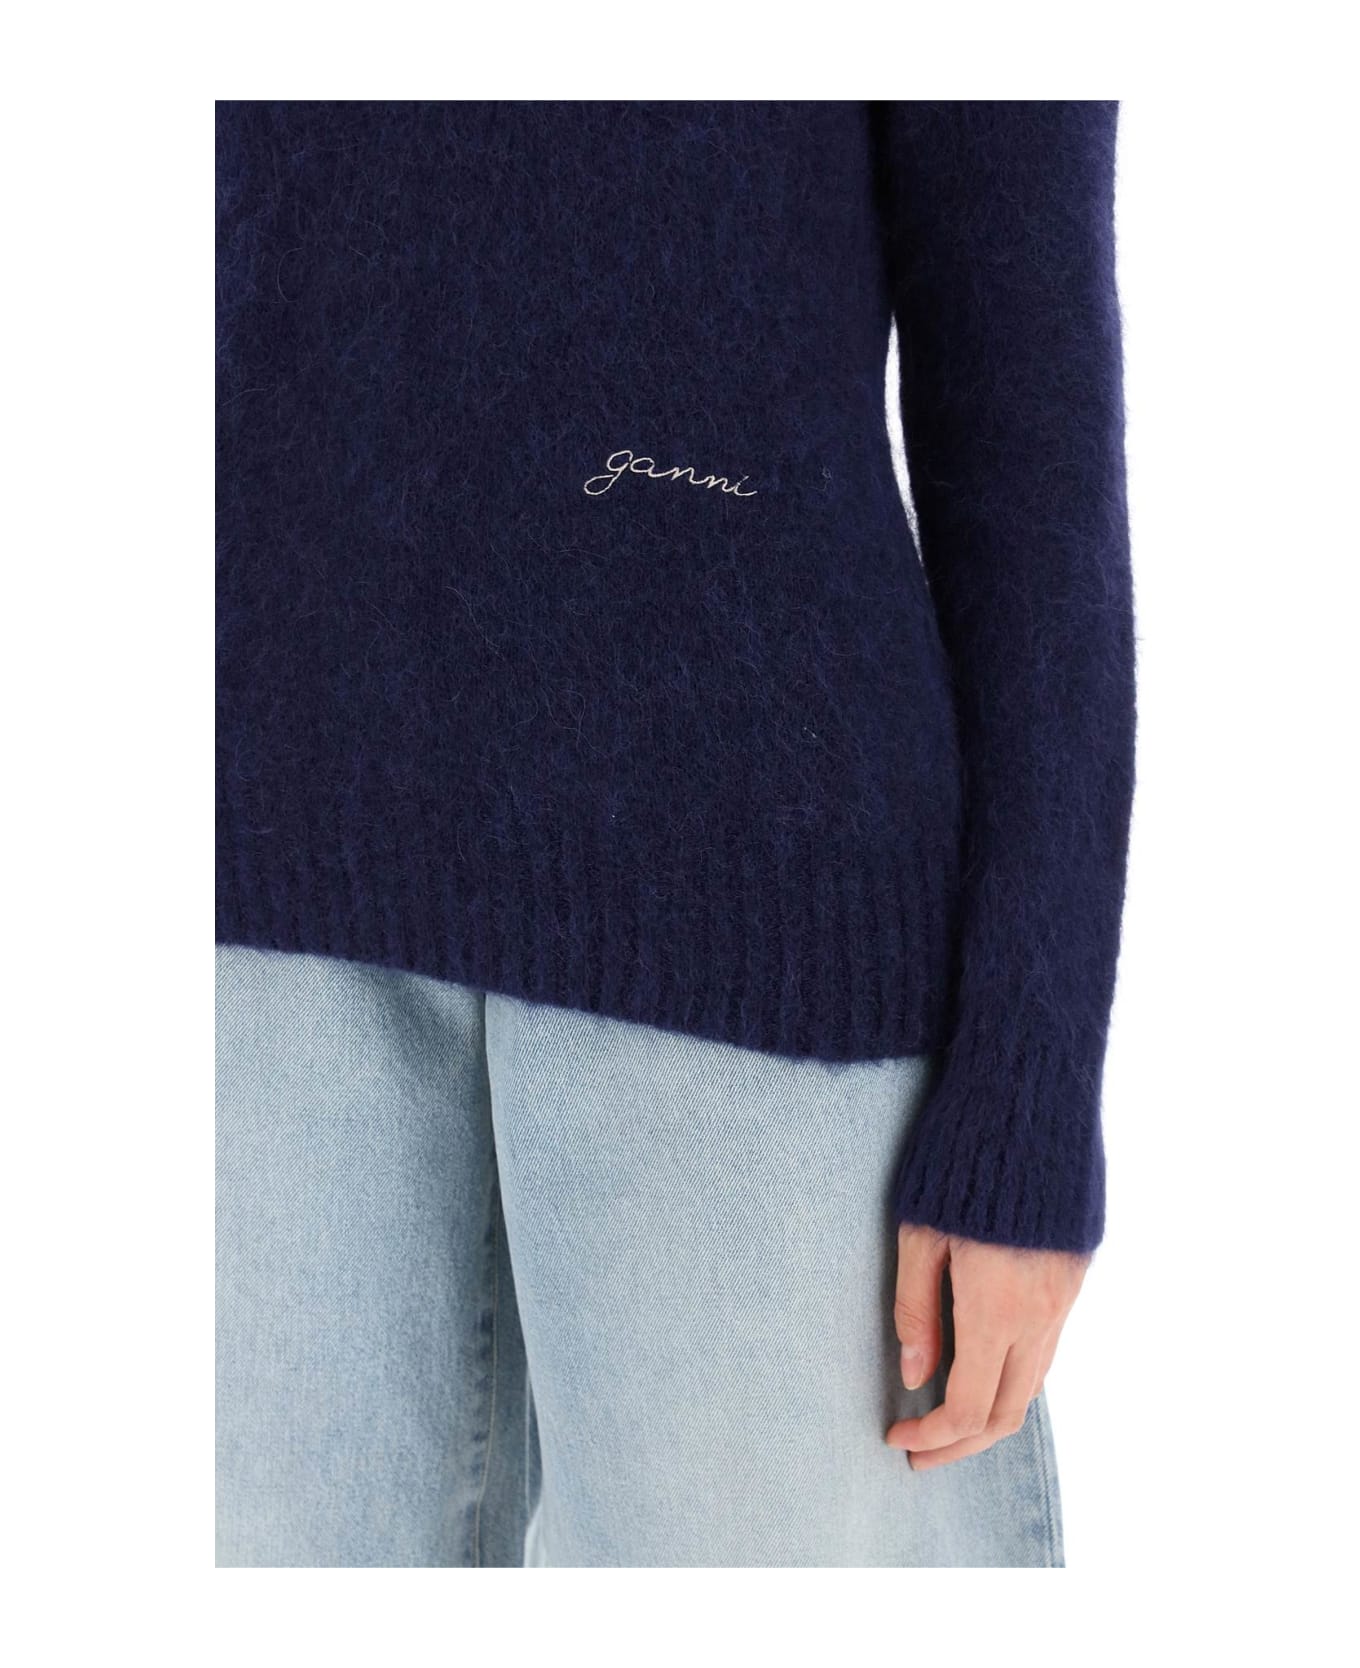 Ganni Brushed Alpaca And Wool Sweater - SKY CAPTAIN (Blue)